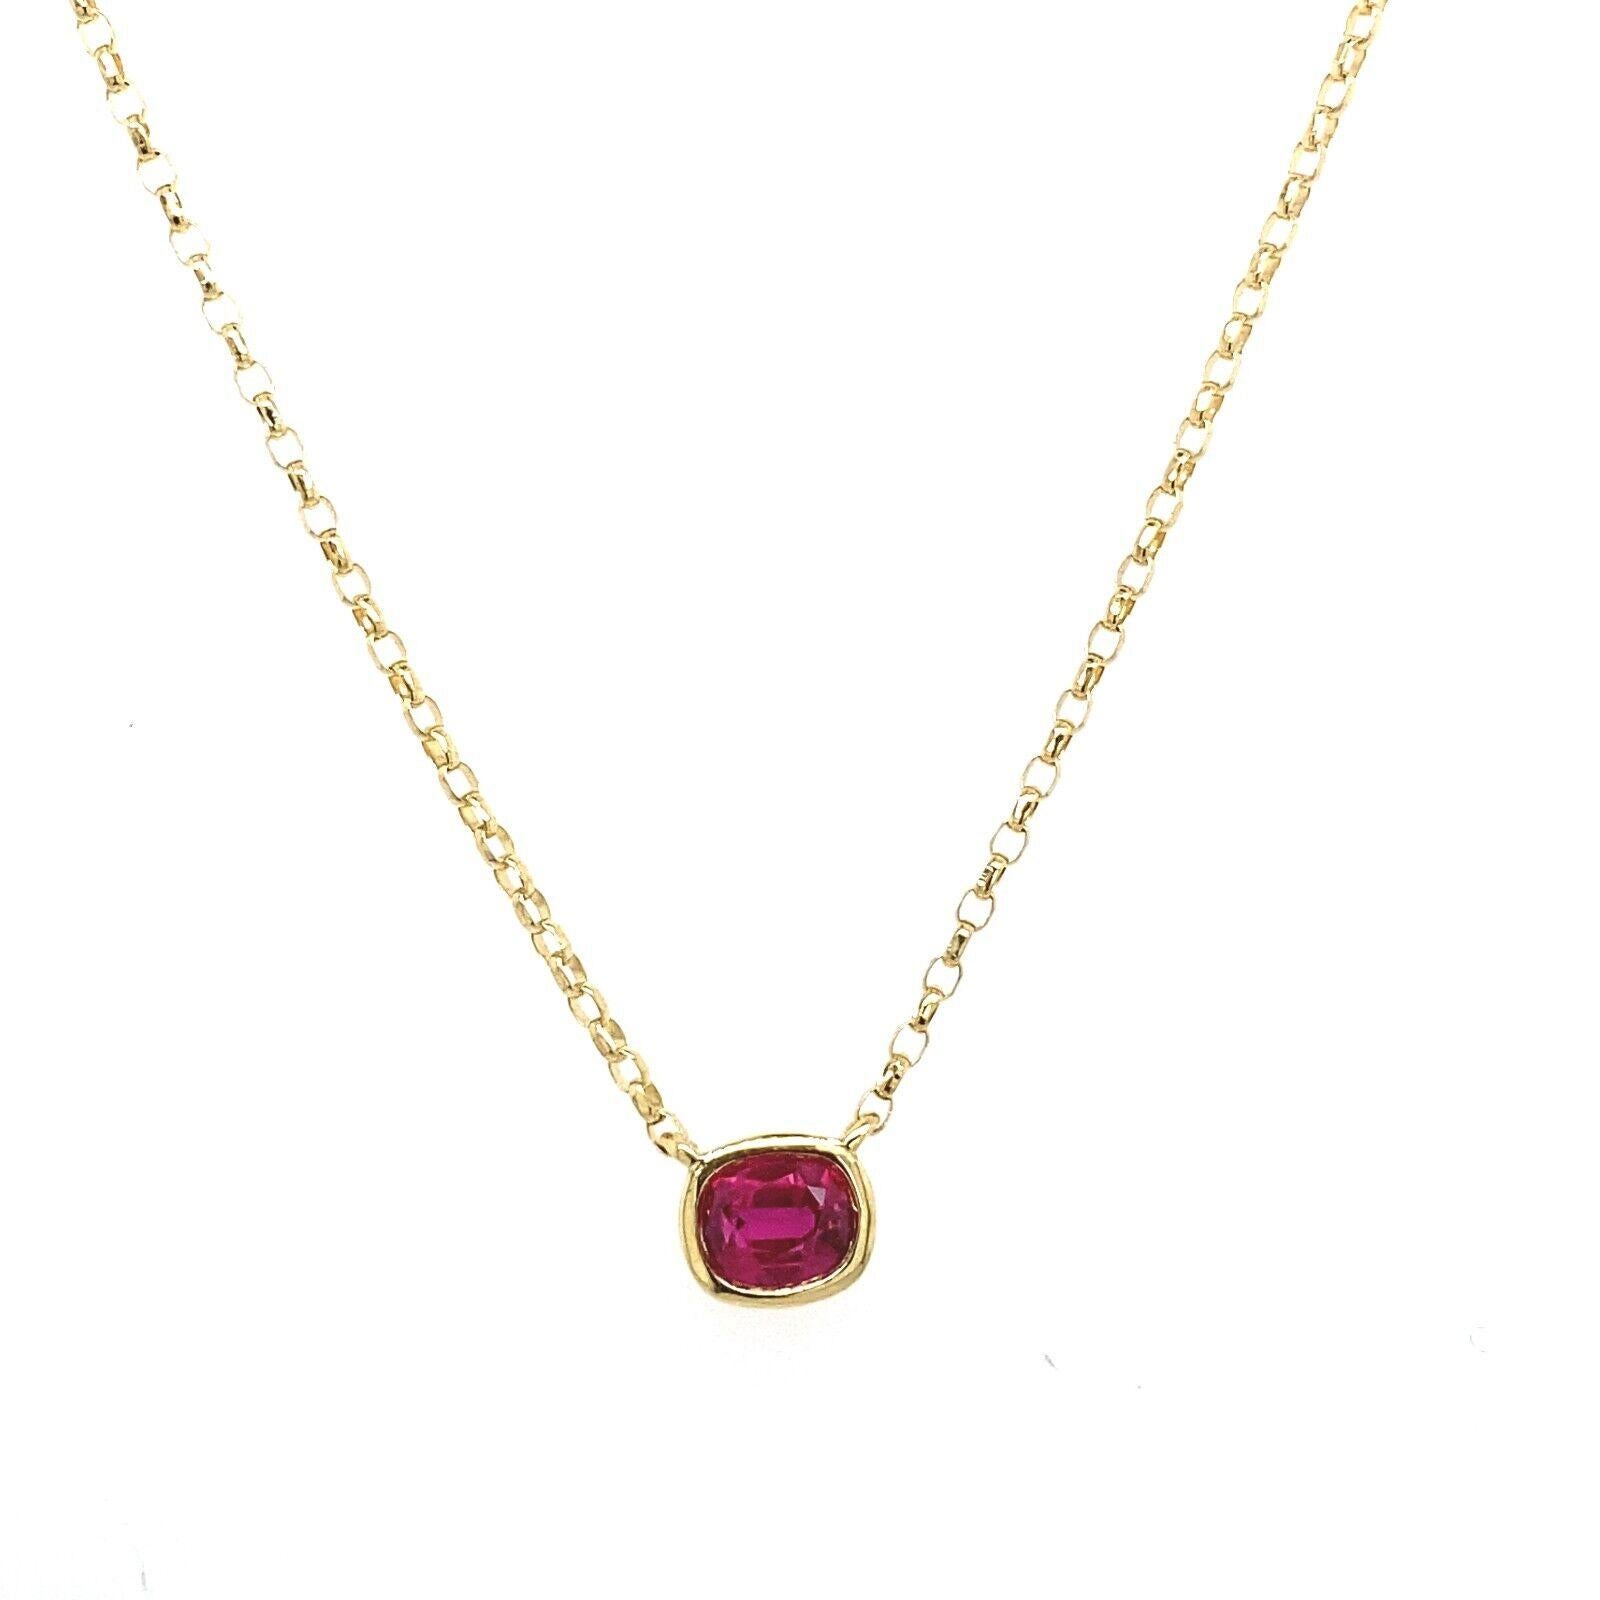 This beautiful pendant rubover setting is set with a 0.41ct cushion-shaped ruby gemstone. The setting is a simple 18ct yellow gold bezel on a 16